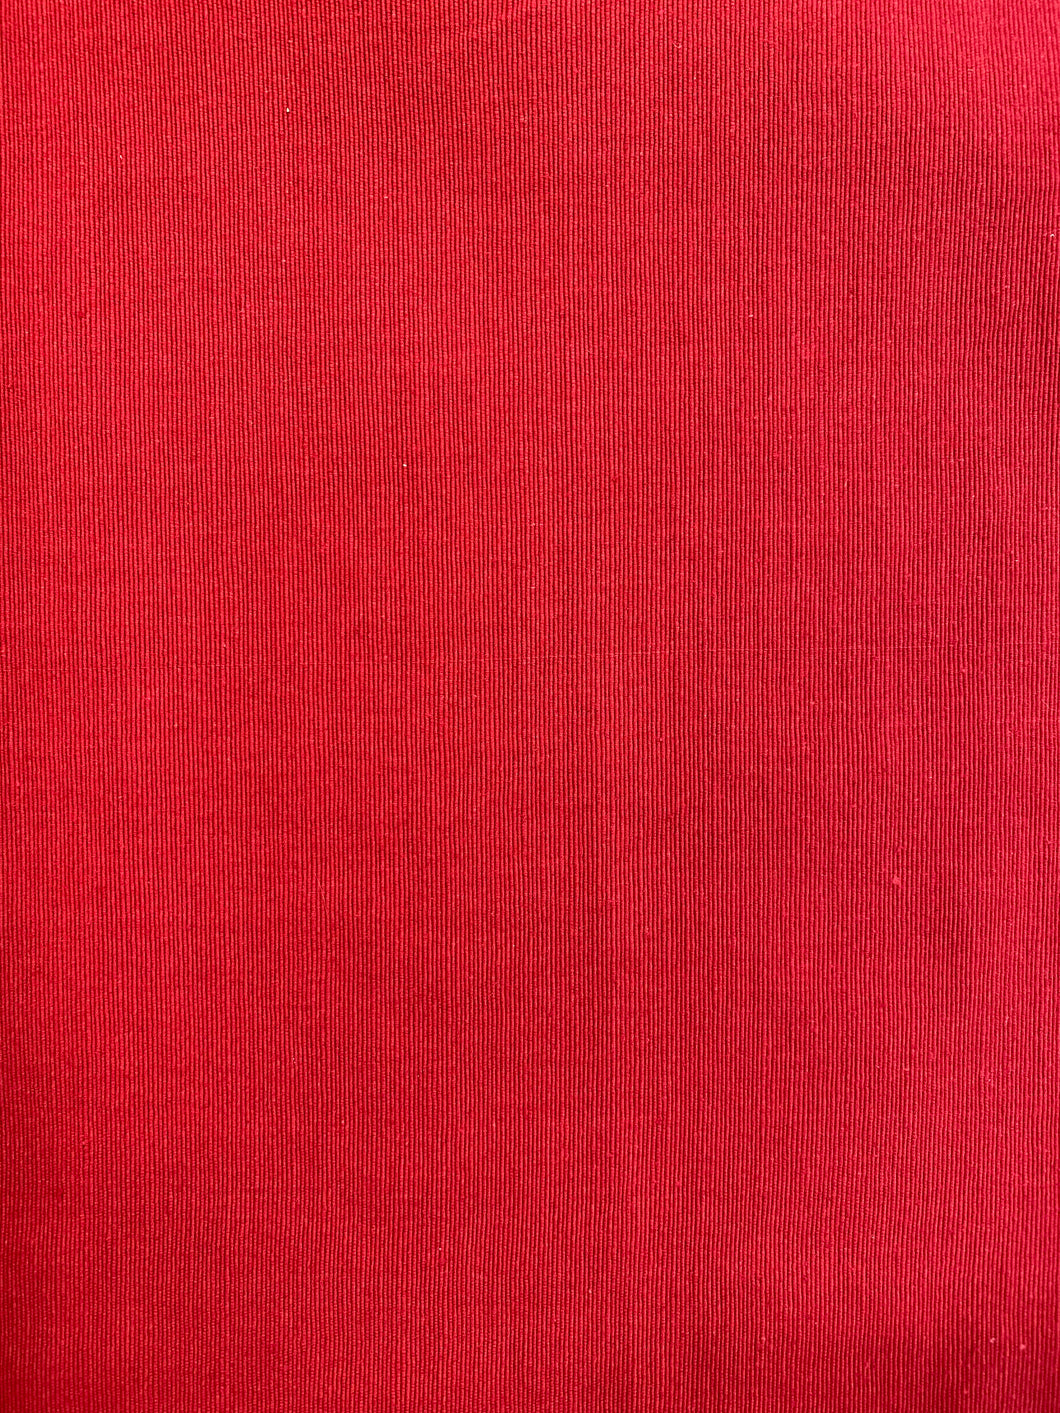 Reddy Red Cotton Fabric